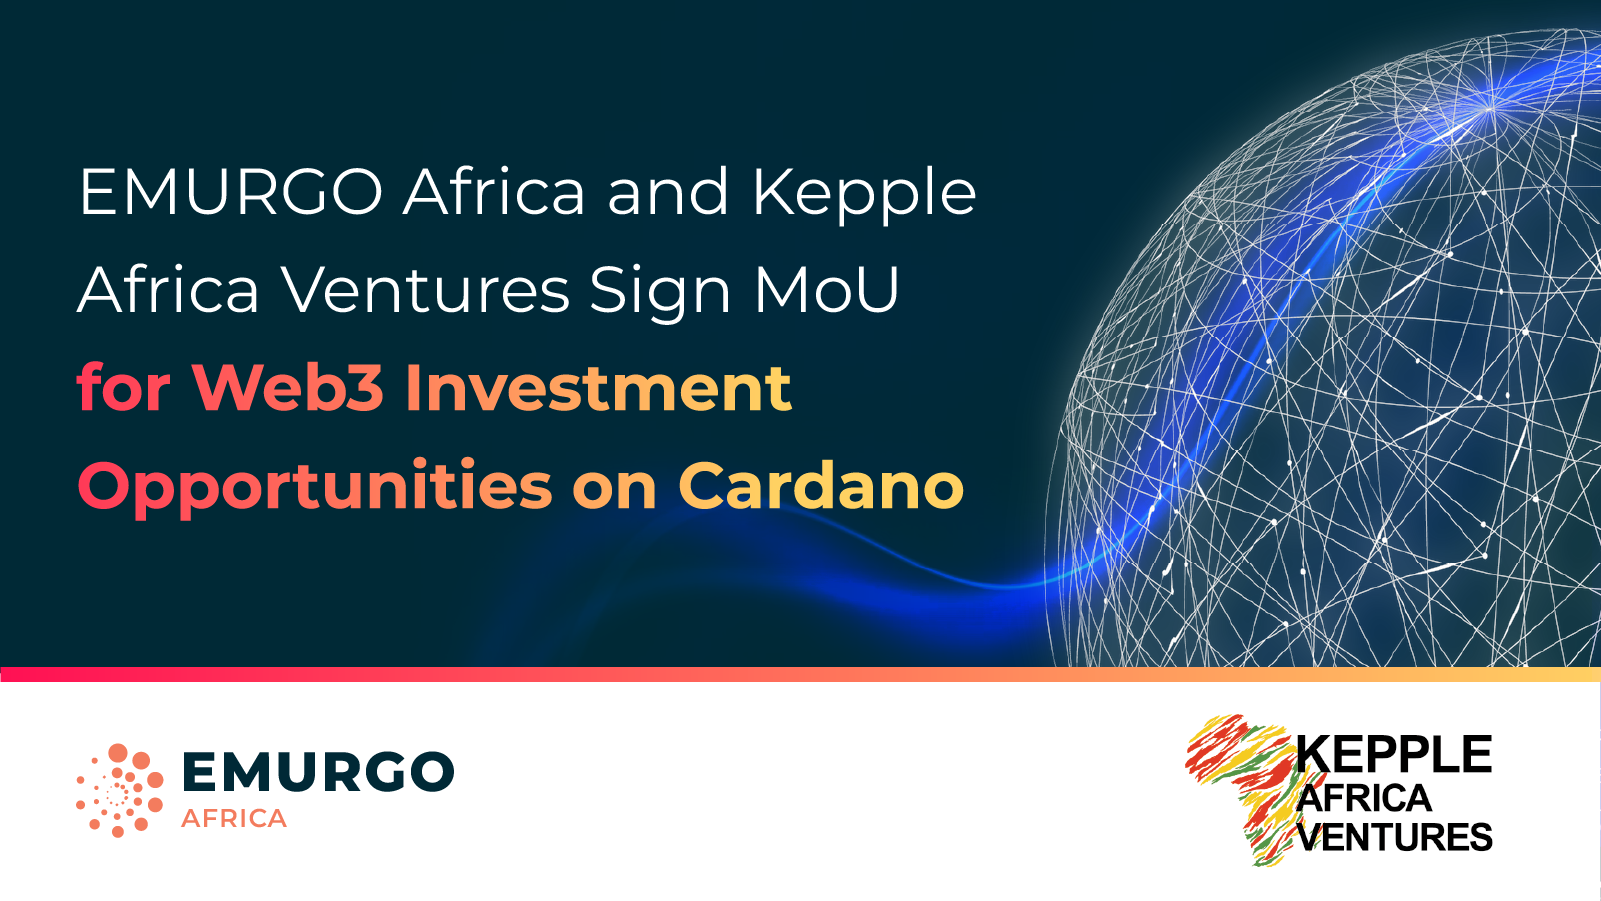 EMURGO Africa and Kepple Africa Ventures Sign MoU for Web3 Investment Opportunities on Cardano